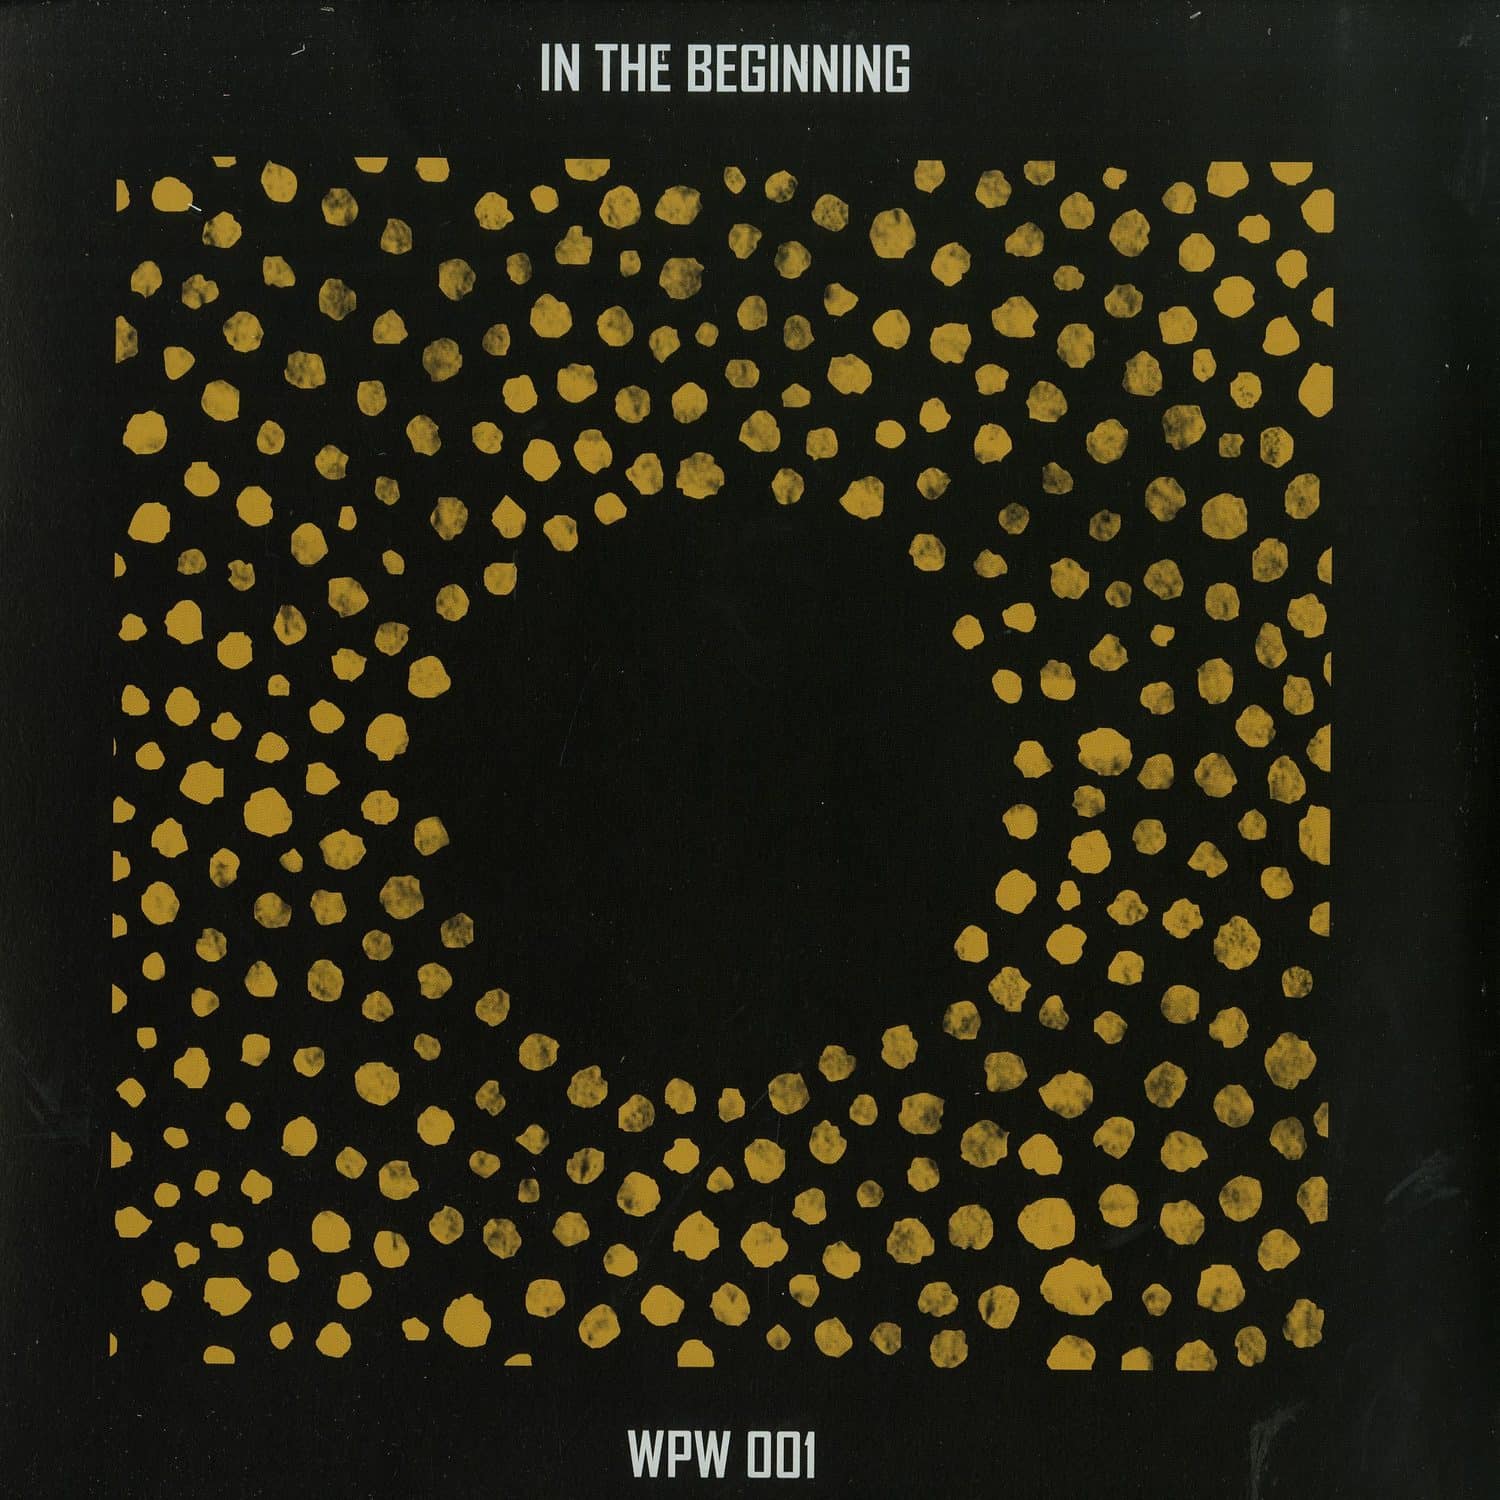 Giovanni Damico / Tomson - IN THE BEGINNING 